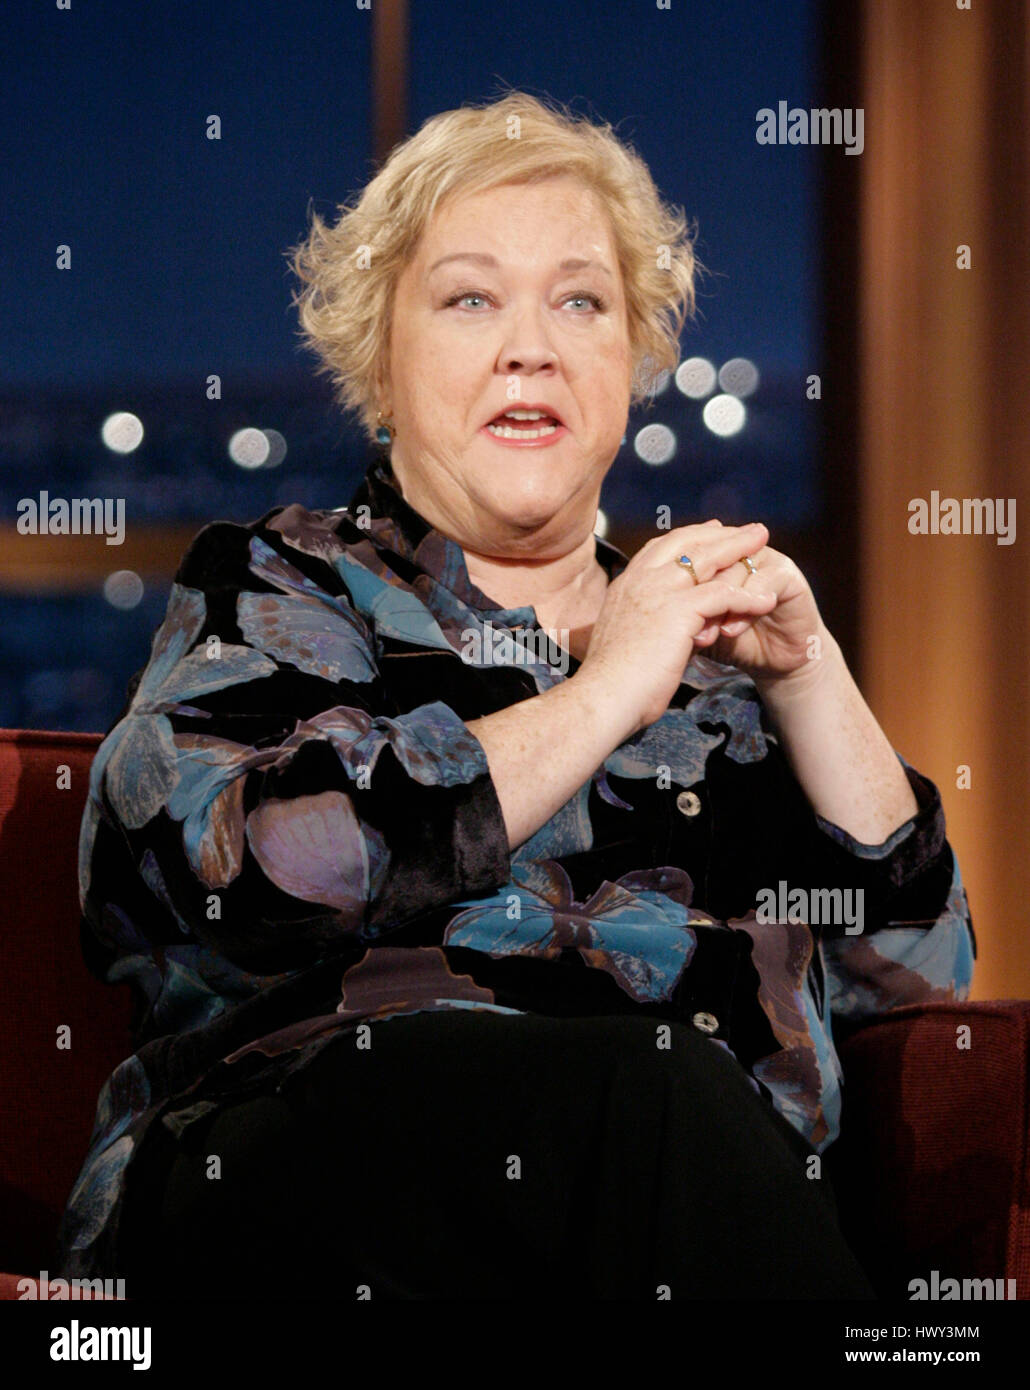 Actress Kathy Kinney during a segment of 'The Late Late Show with Craig Ferguson' at CBS Television City in Los Angeles on Wednesday, Nov. 12, 2008. Photo by Francis Specker Stock Photo